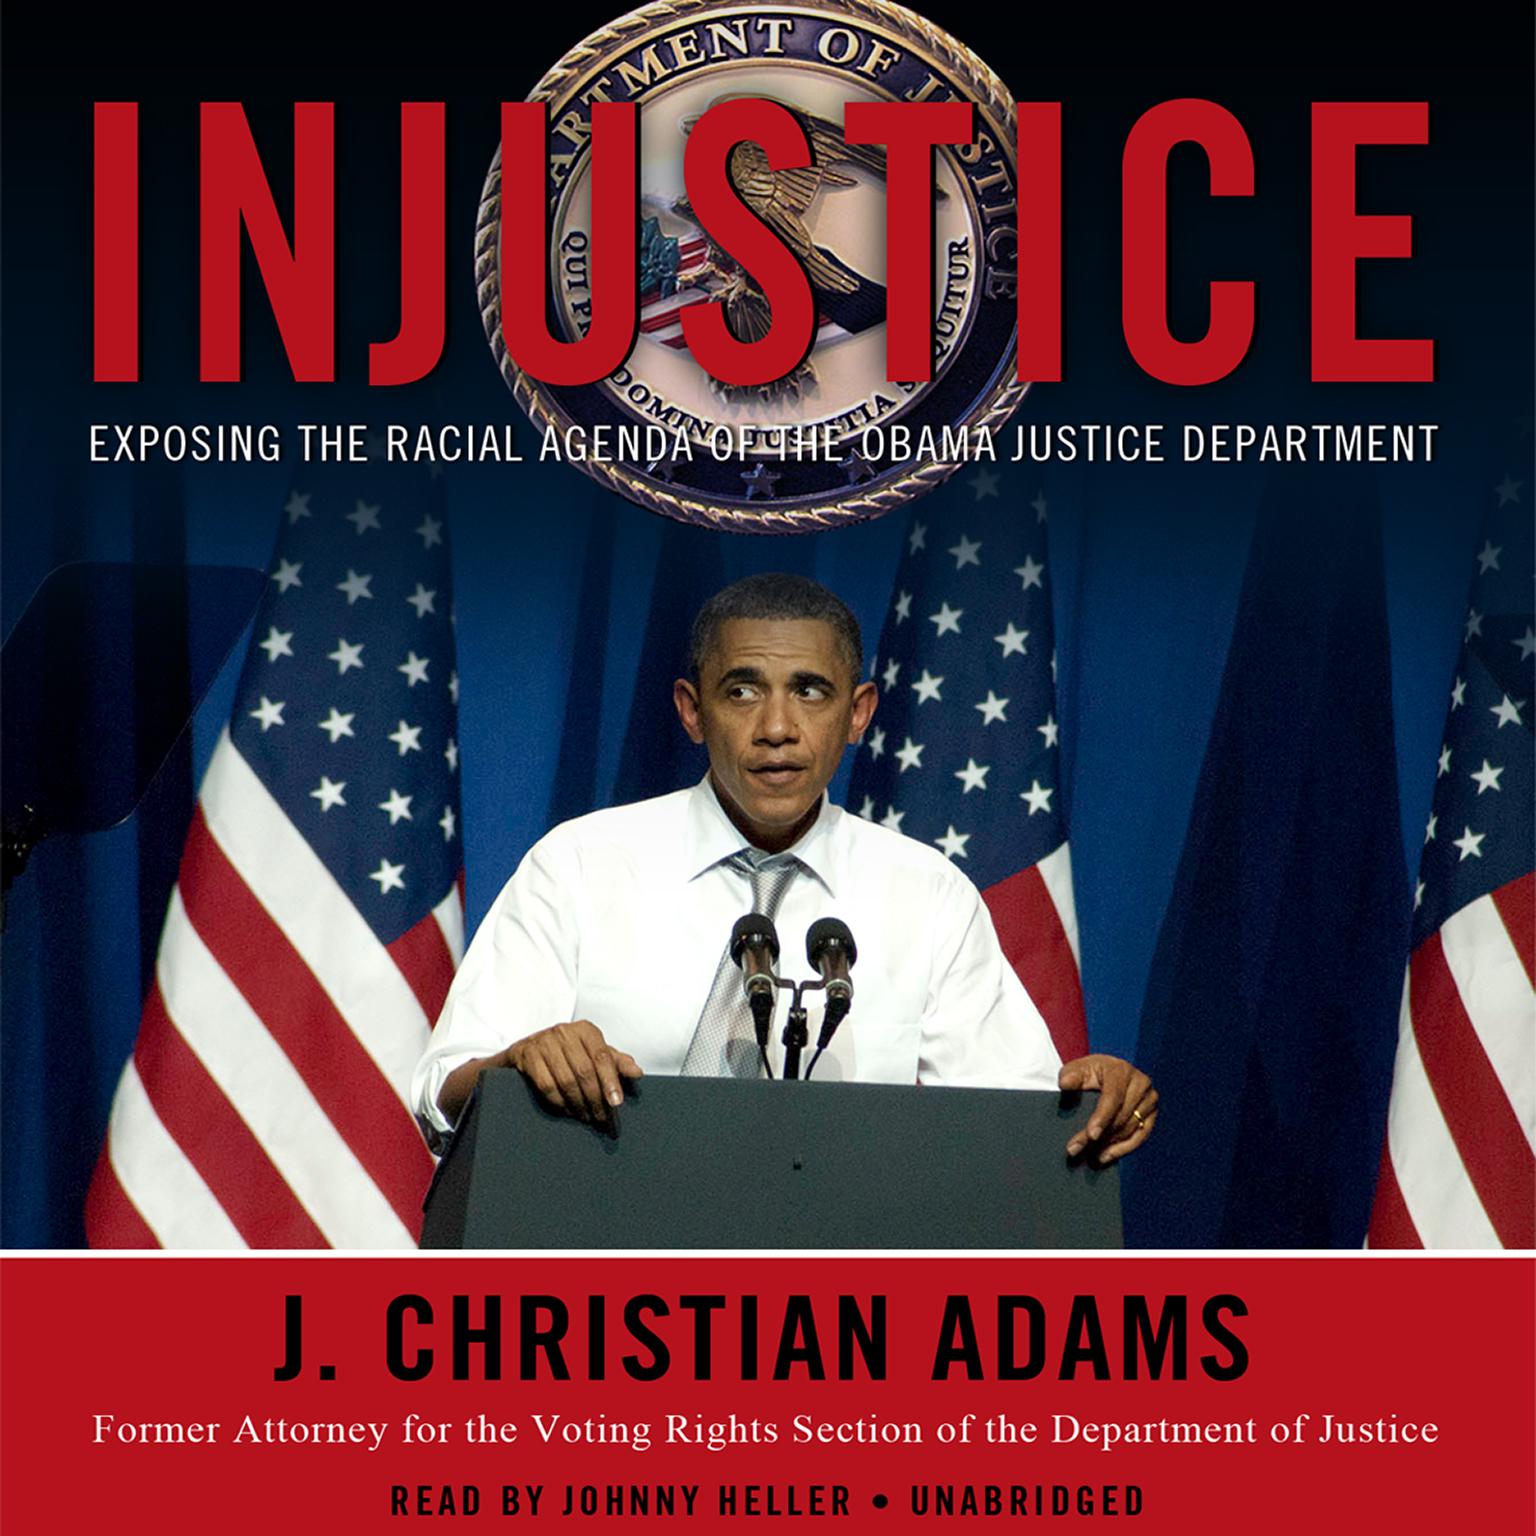 Injustice: Exposing the Racial Agenda of the Obama Justice Department Audiobook, by J. Christian Adams